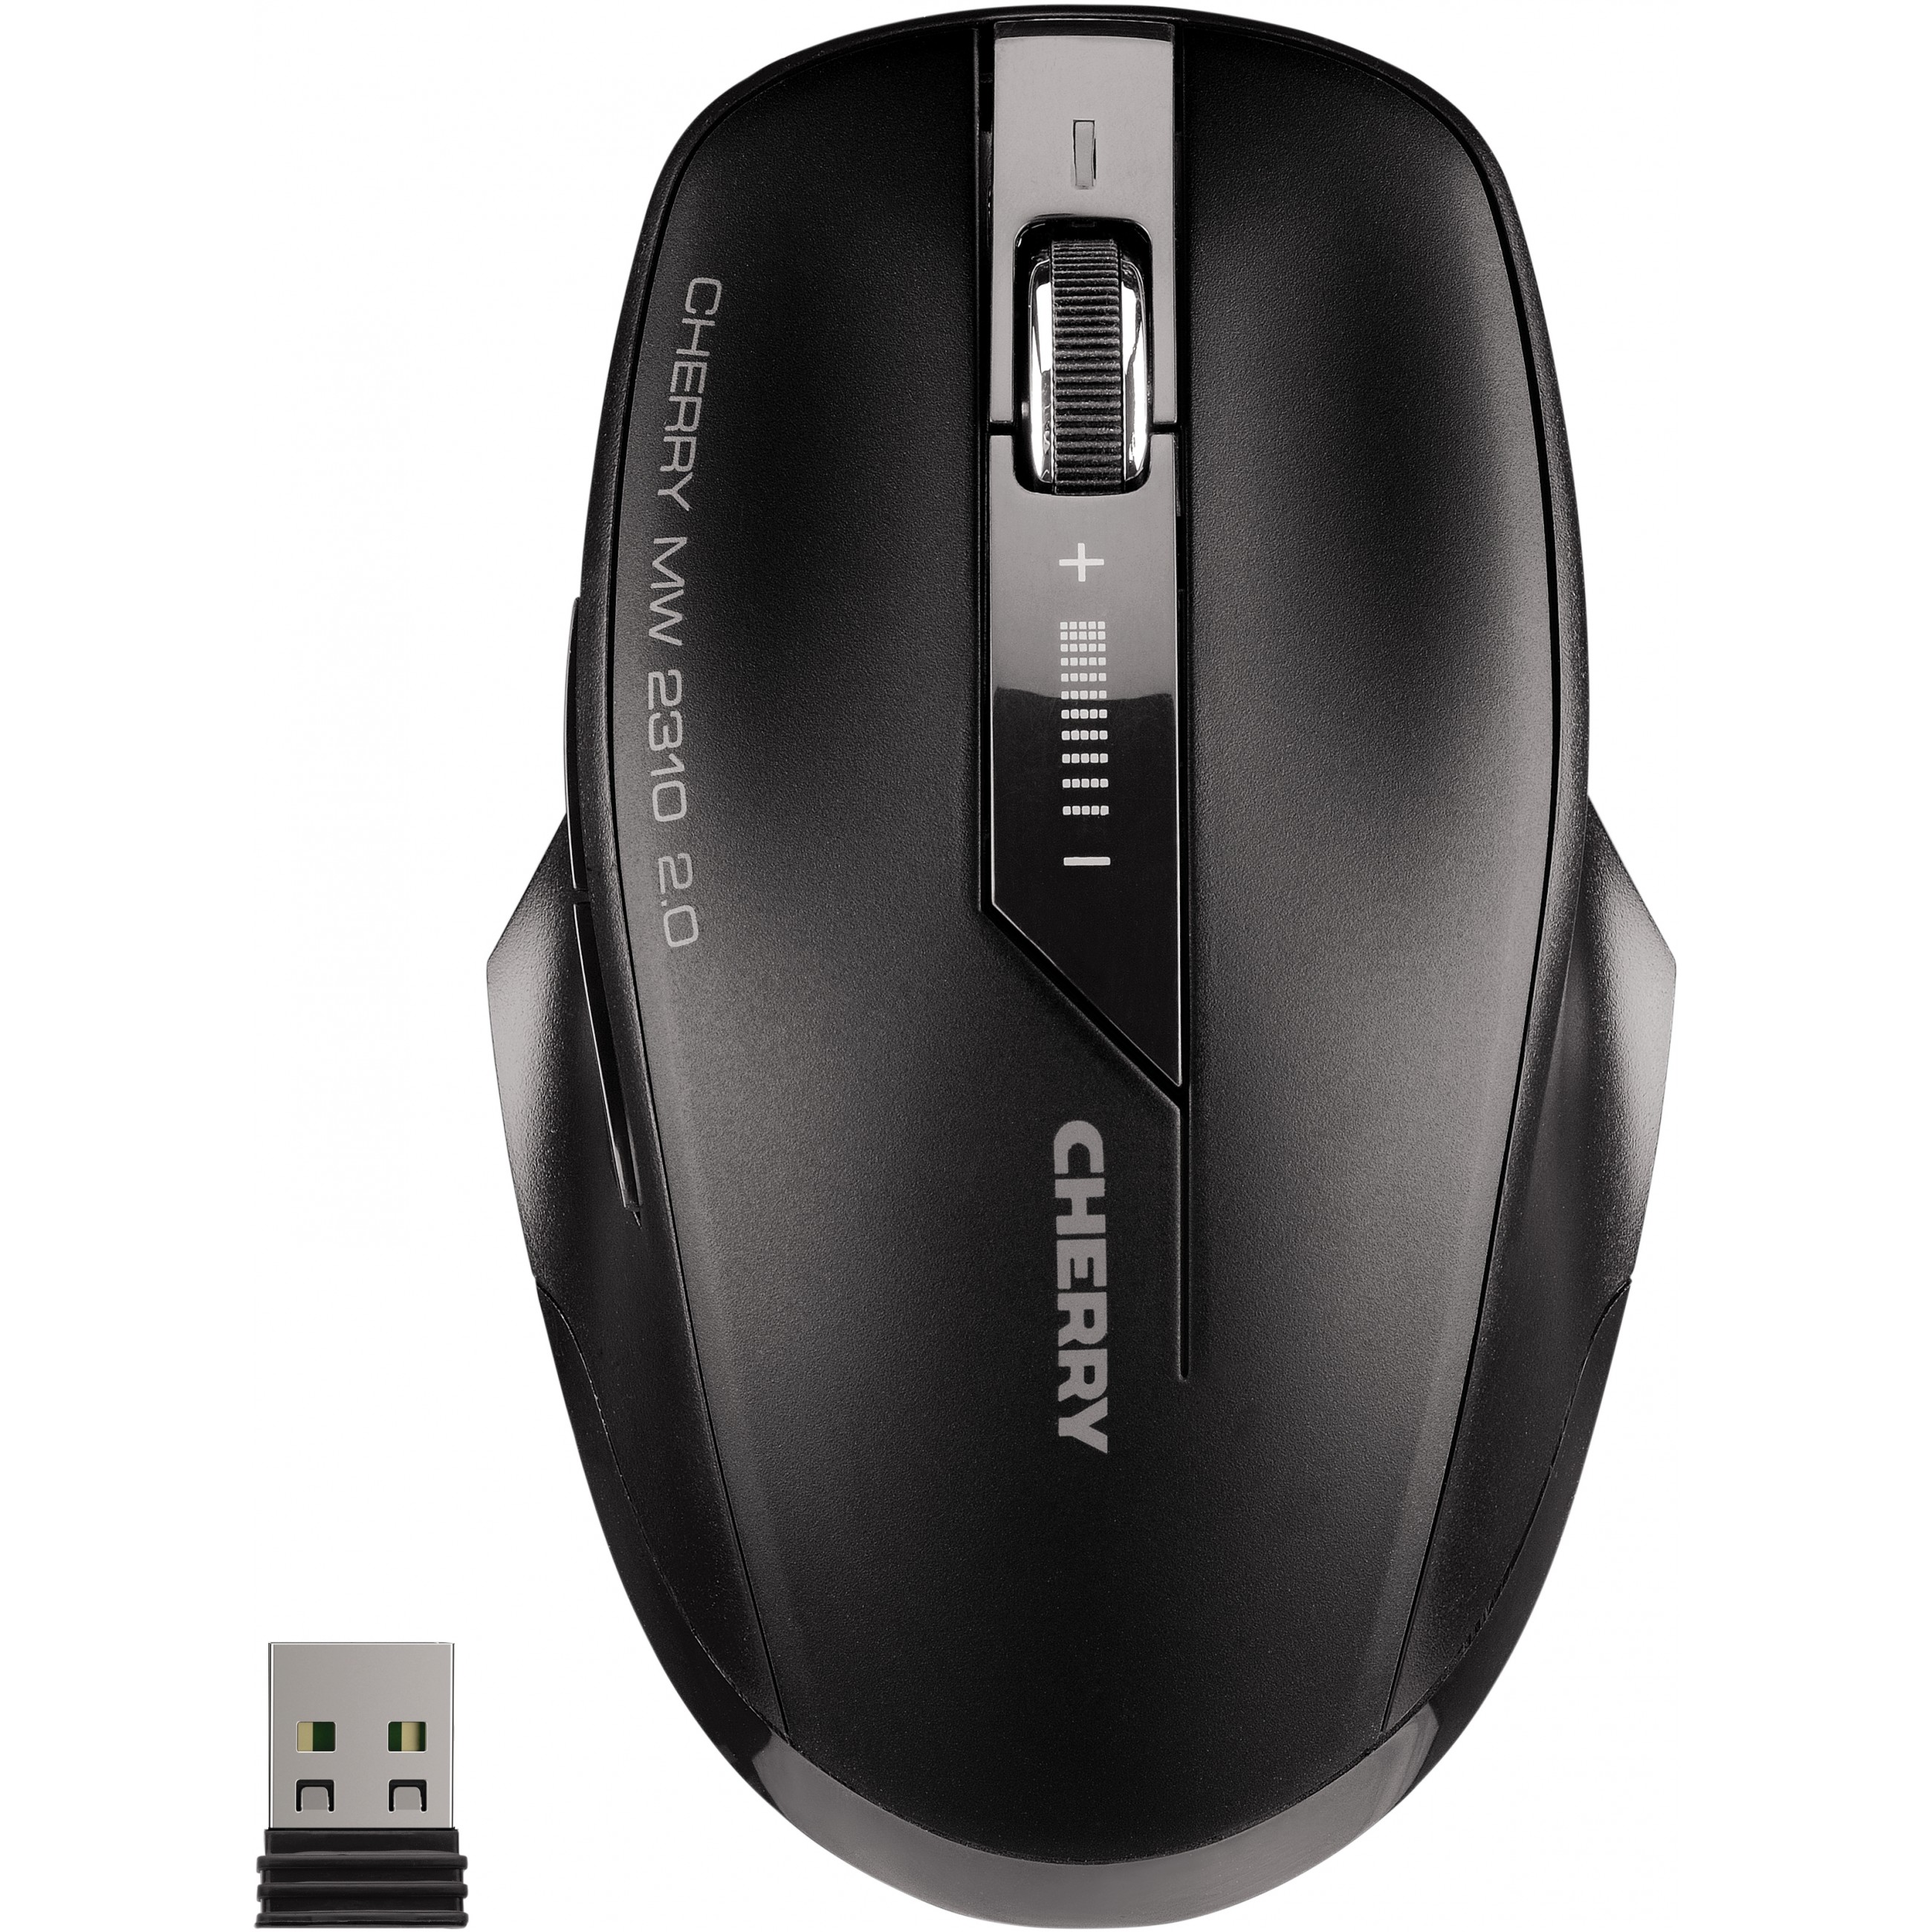 CHERRY MW 2310 2.0 mouse